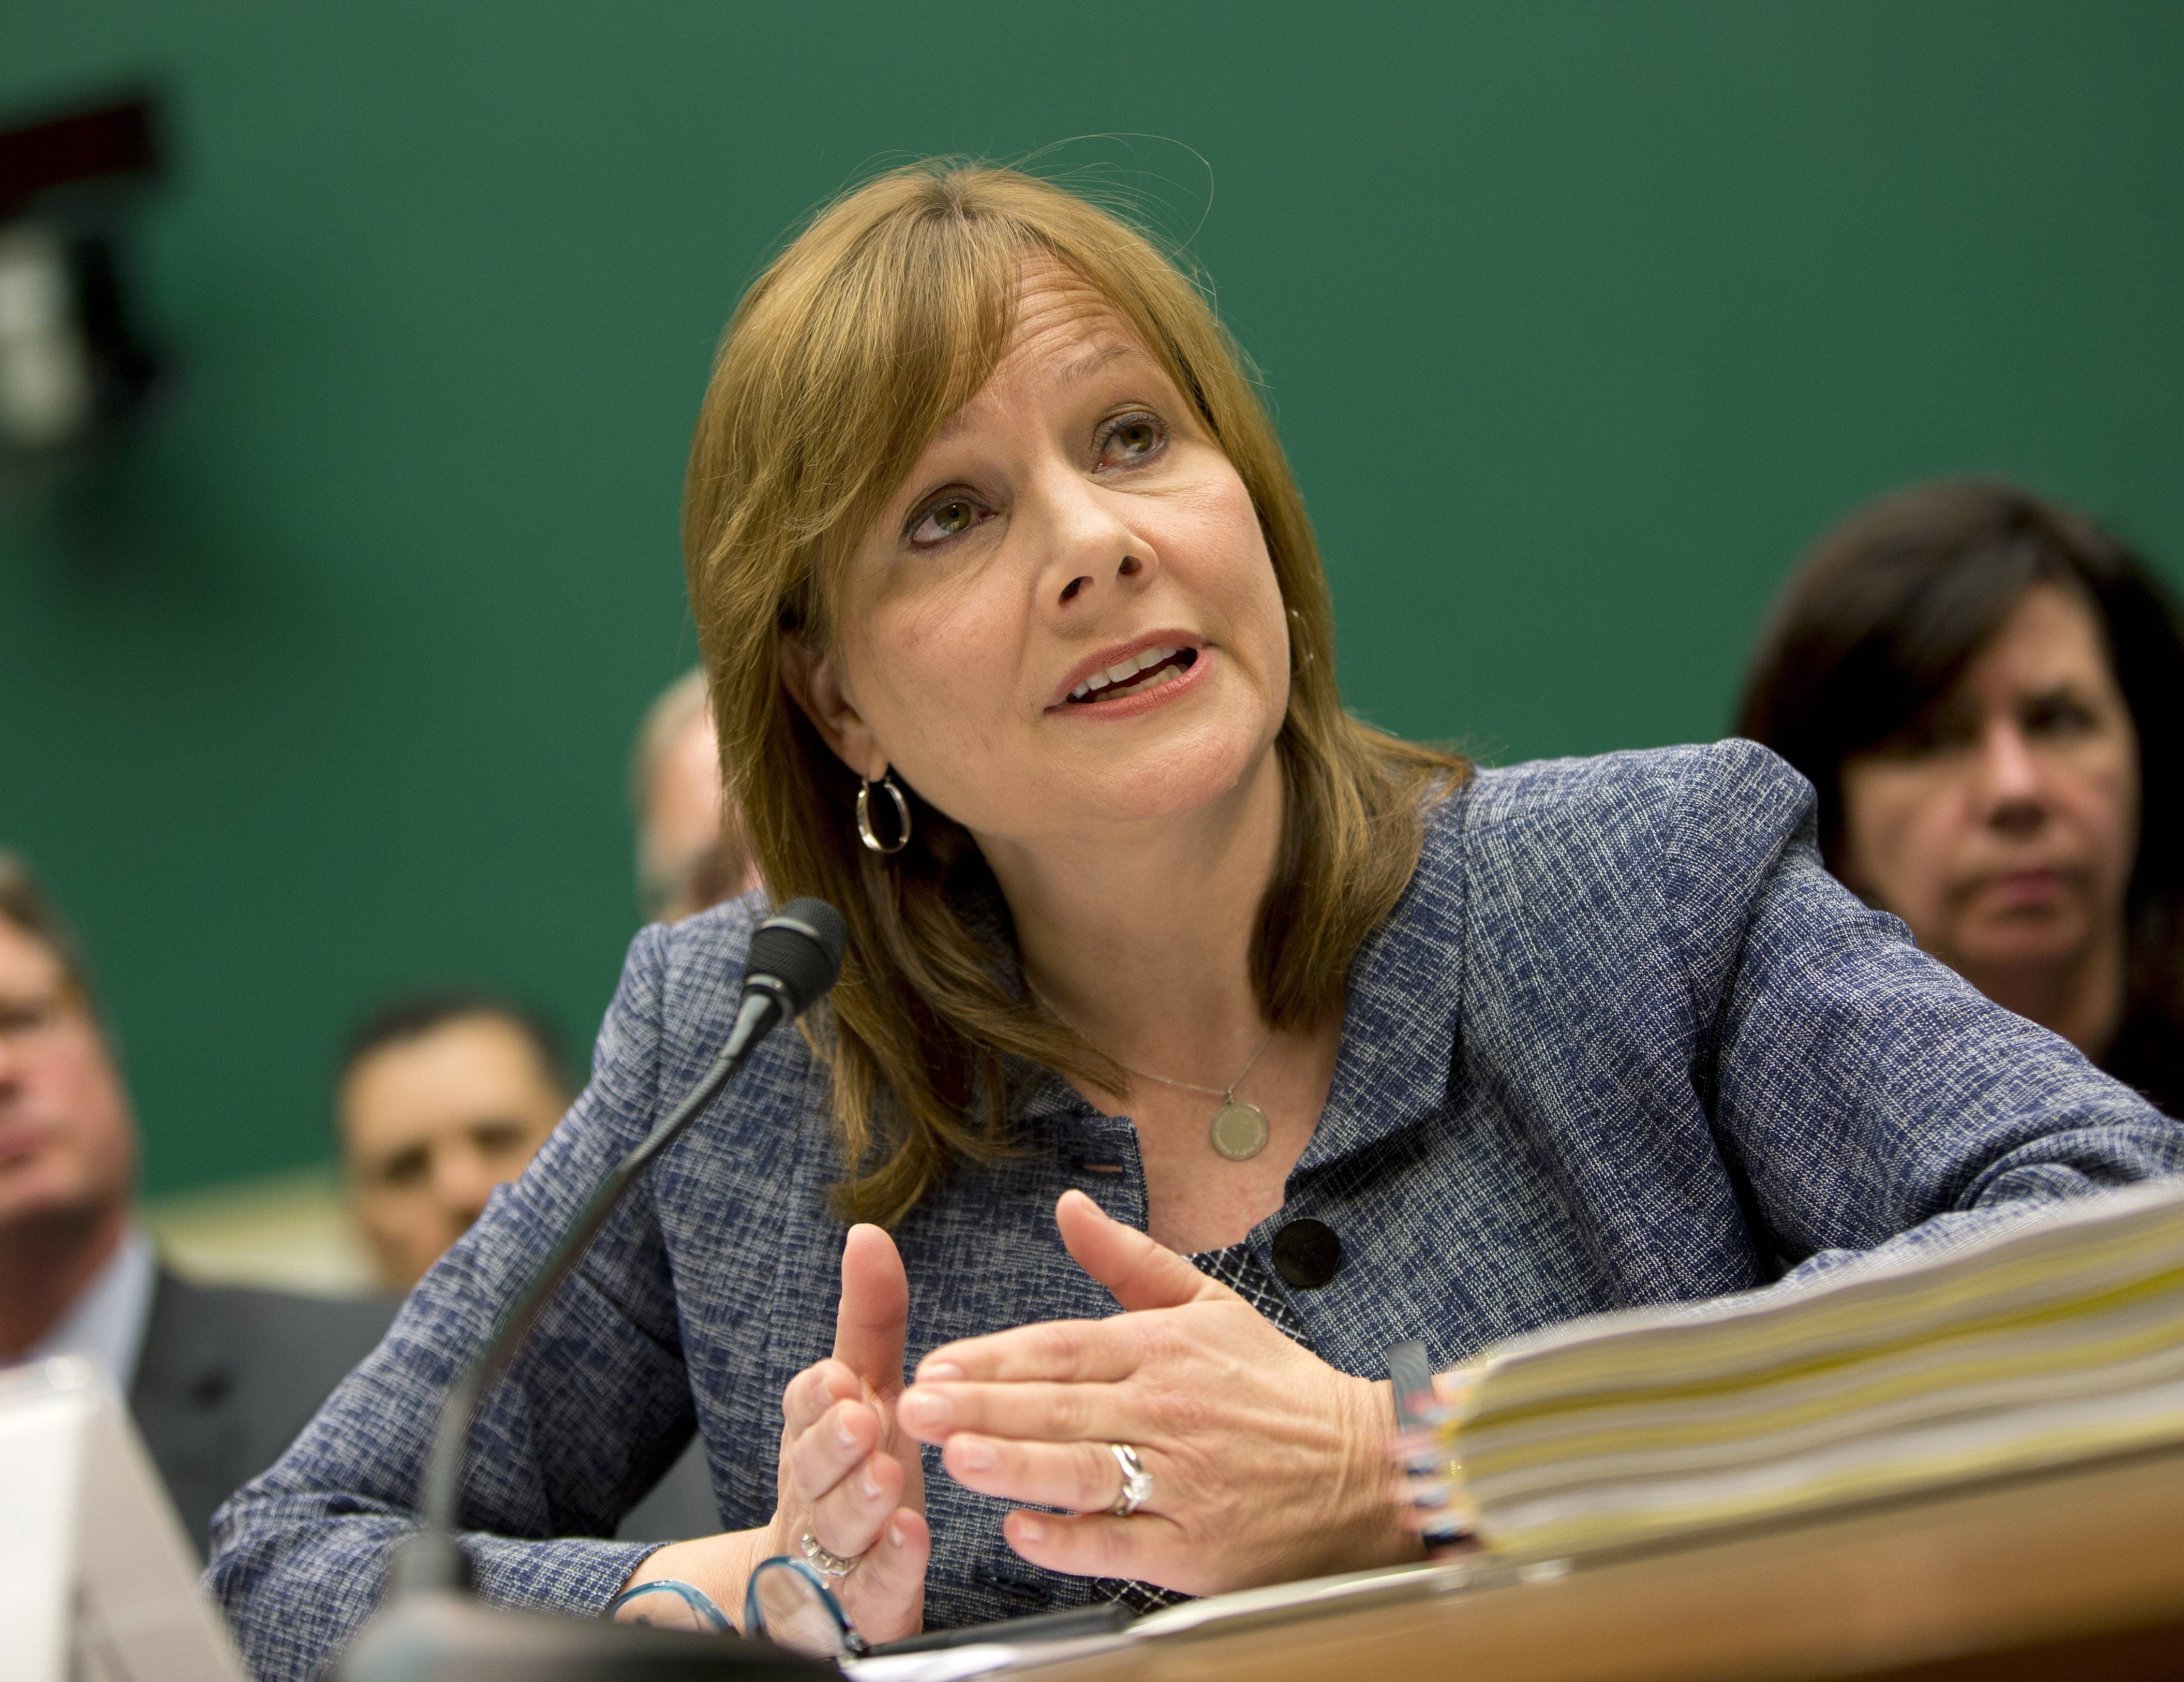 General Motors CEO Mary Barra testifies on Capitol Hill in Washington on April 1, 2014, before the House Energy and Commerce subcommittee on Oversight and Investigation. The committee is looking for answers from Barra about safety defects and mishandled recall of 2.6 million small cars with a faulty ignition switch.